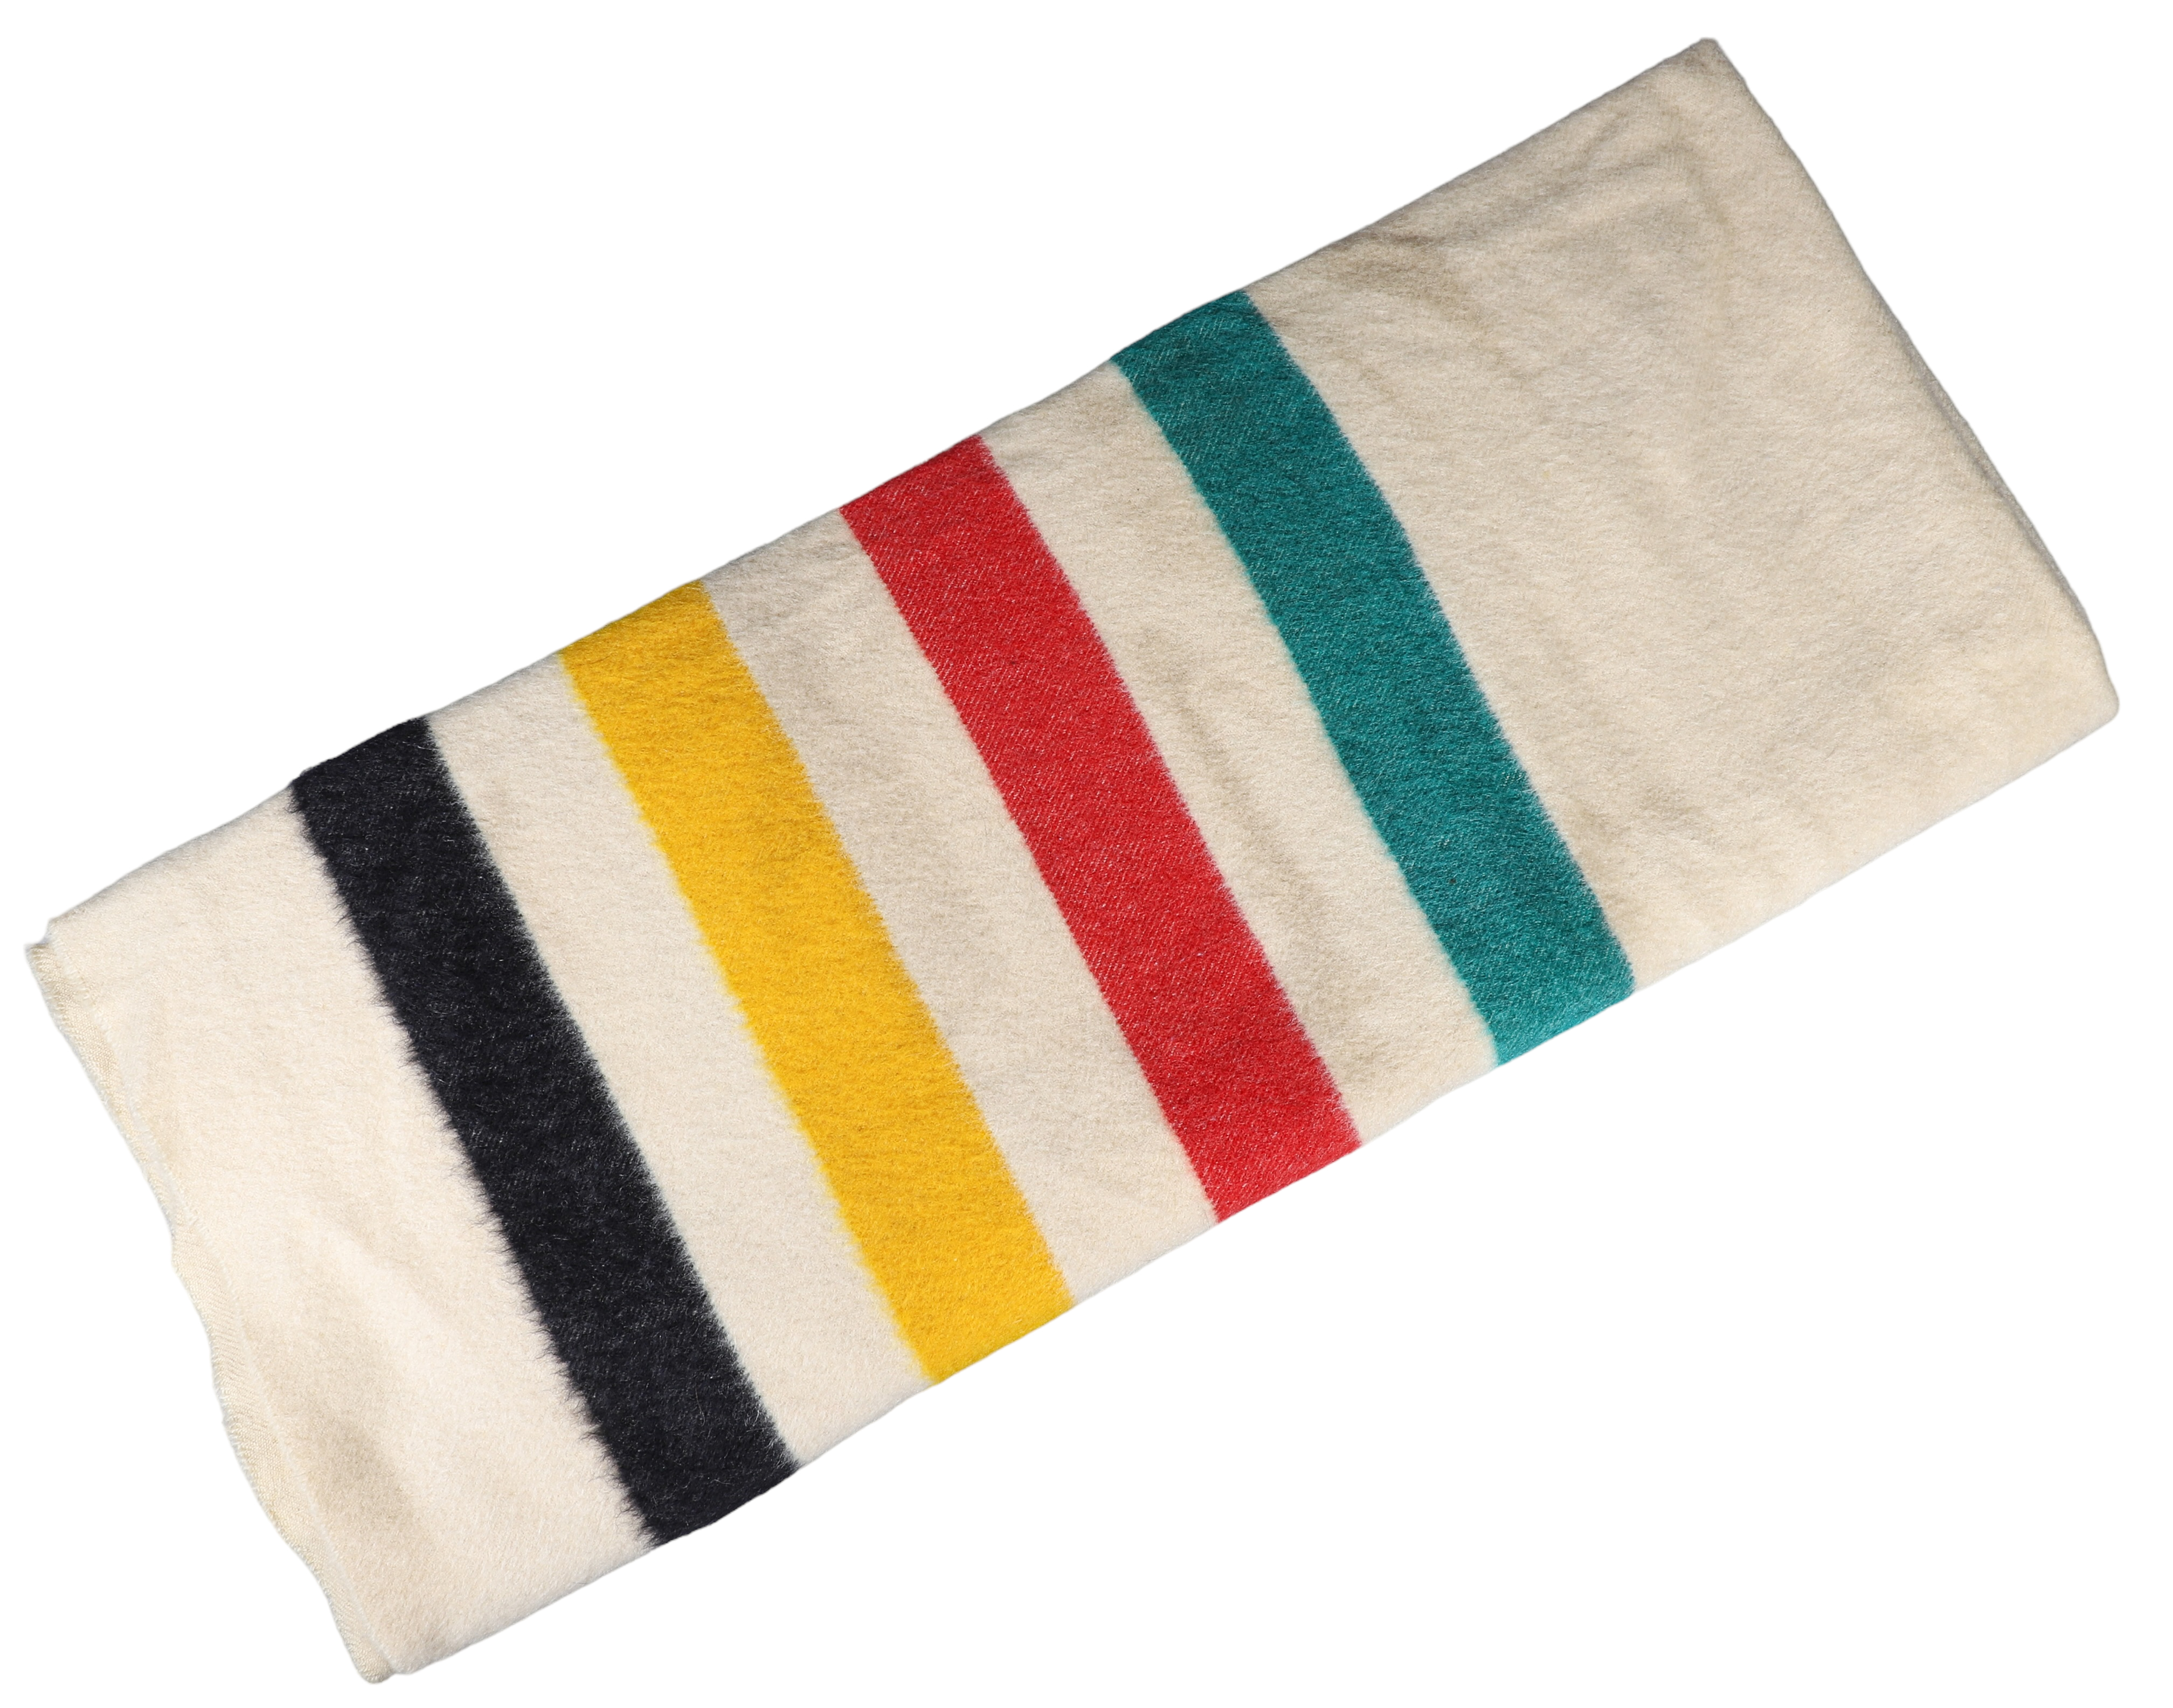 Hudson Bay 4 point wool blanket, without